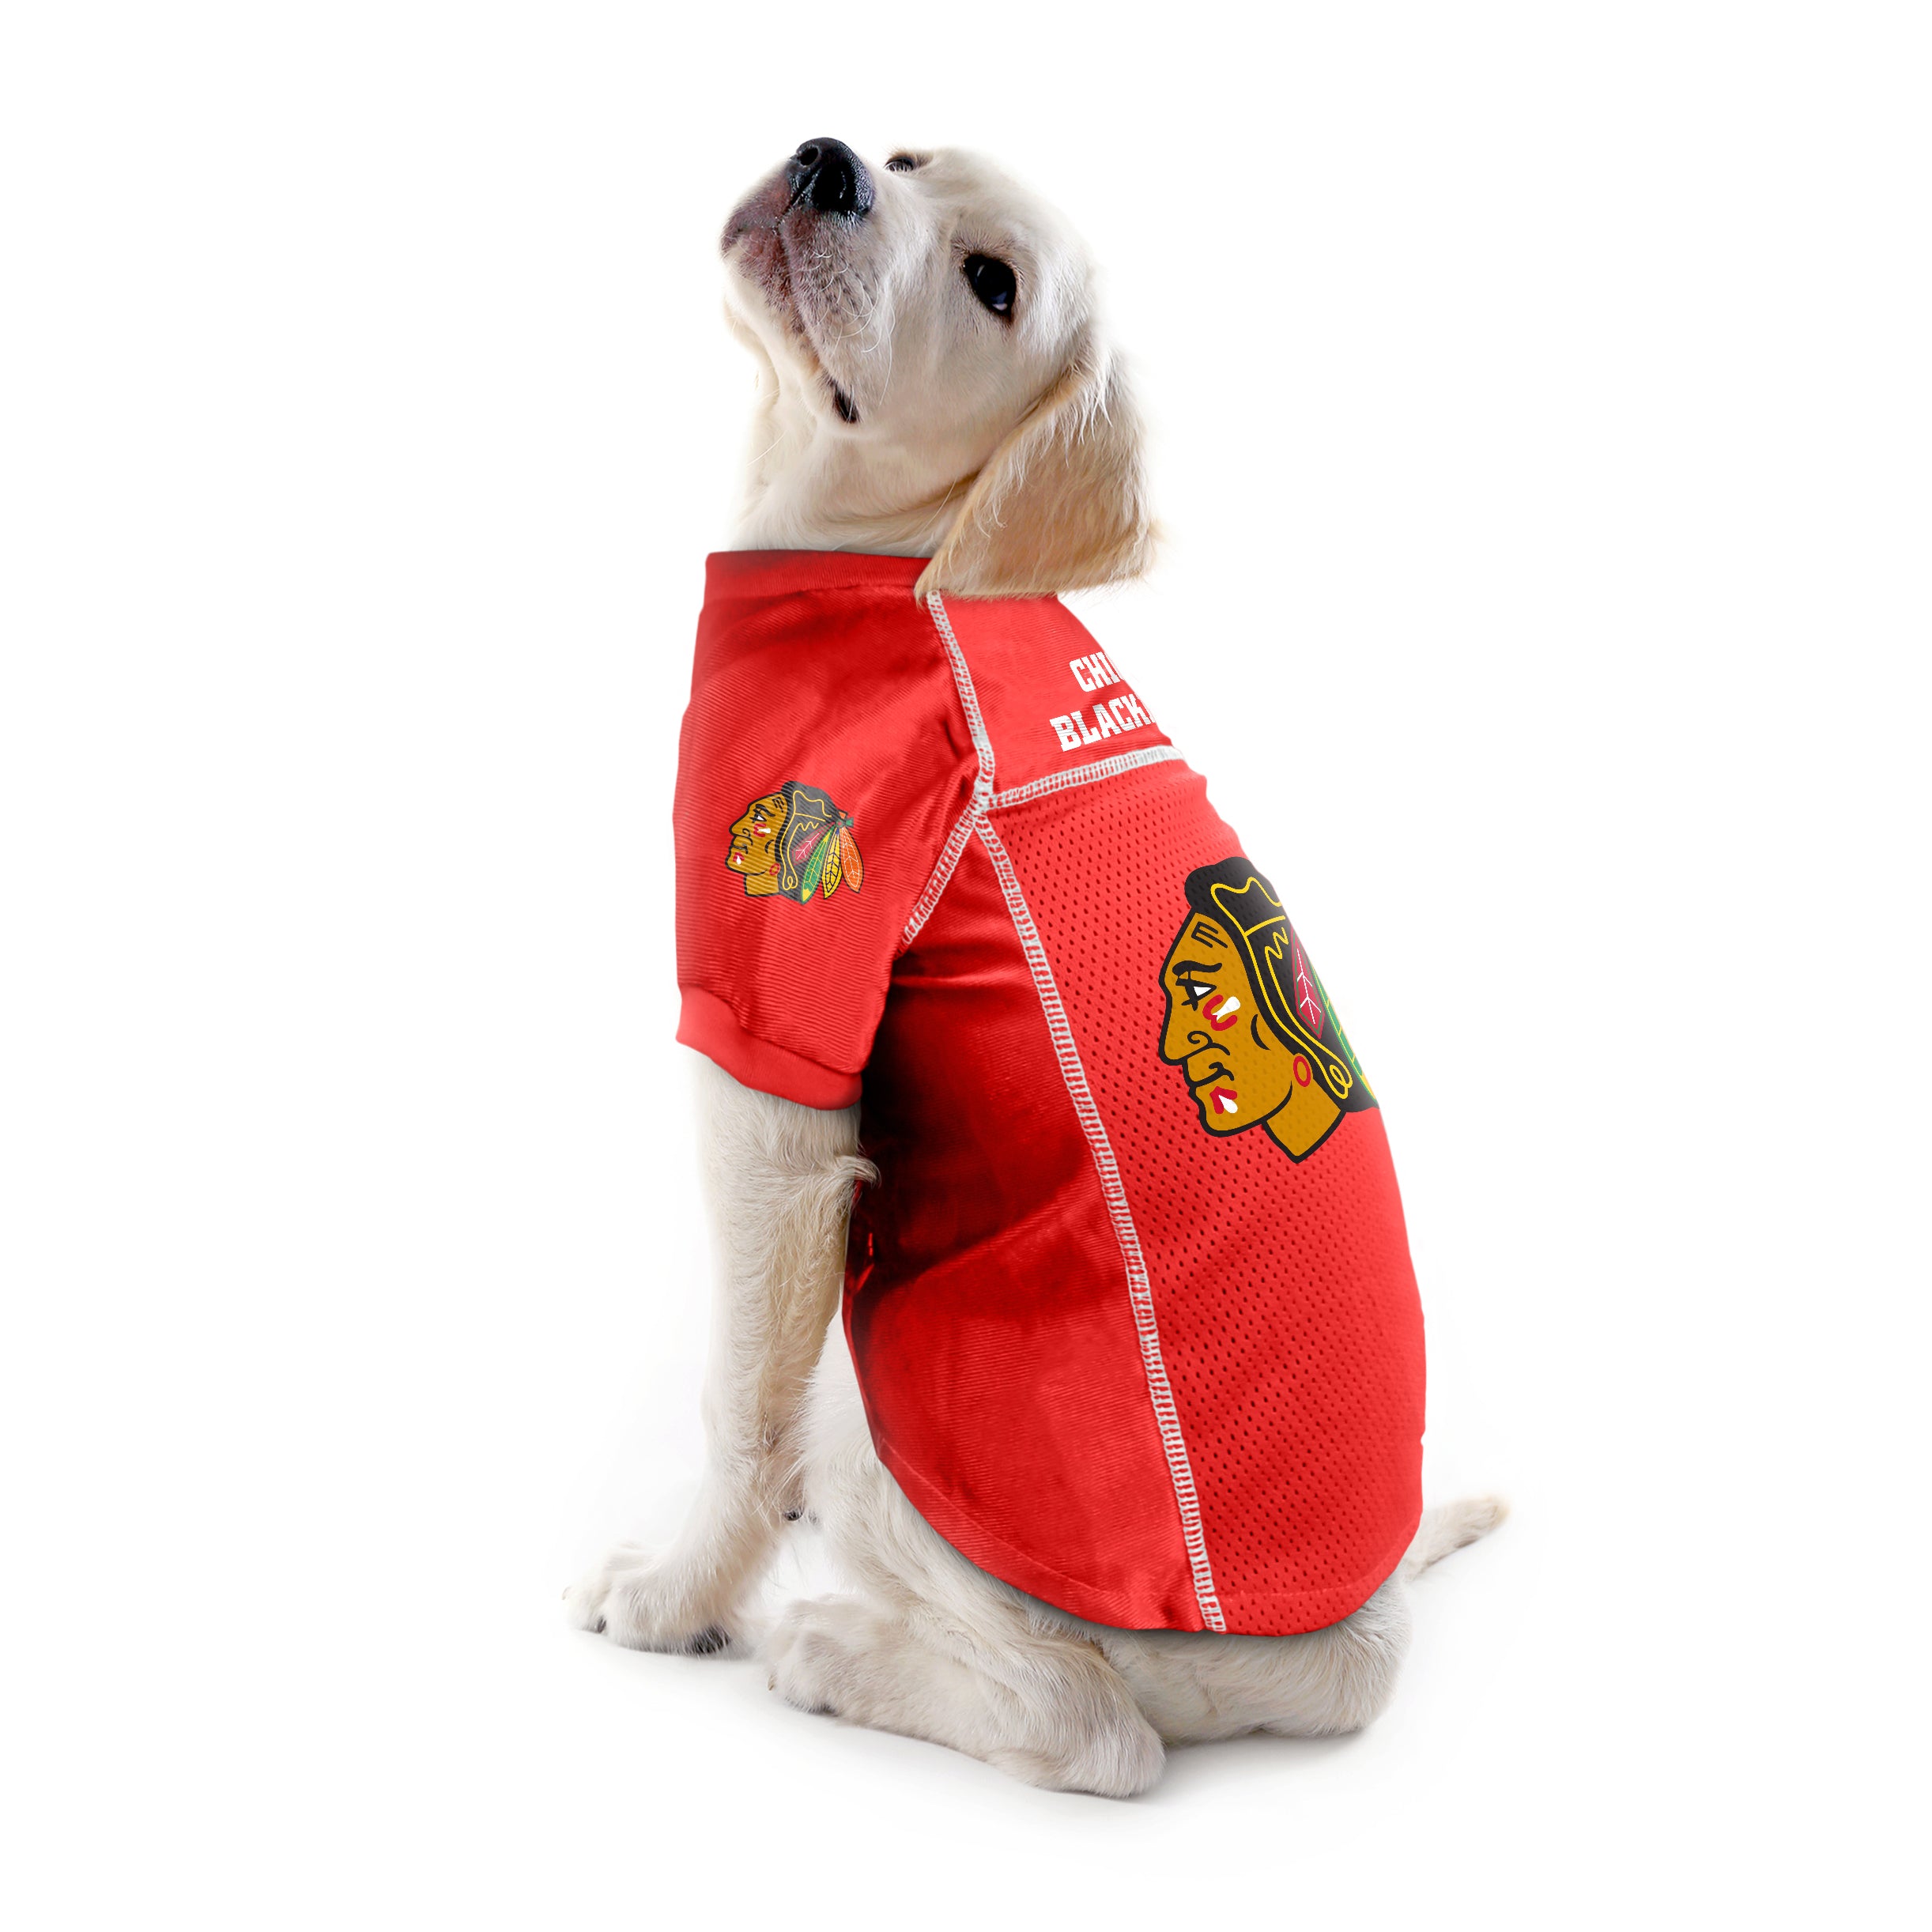 Chicago Blackhawks Jersey for Dogs from Golly Gear